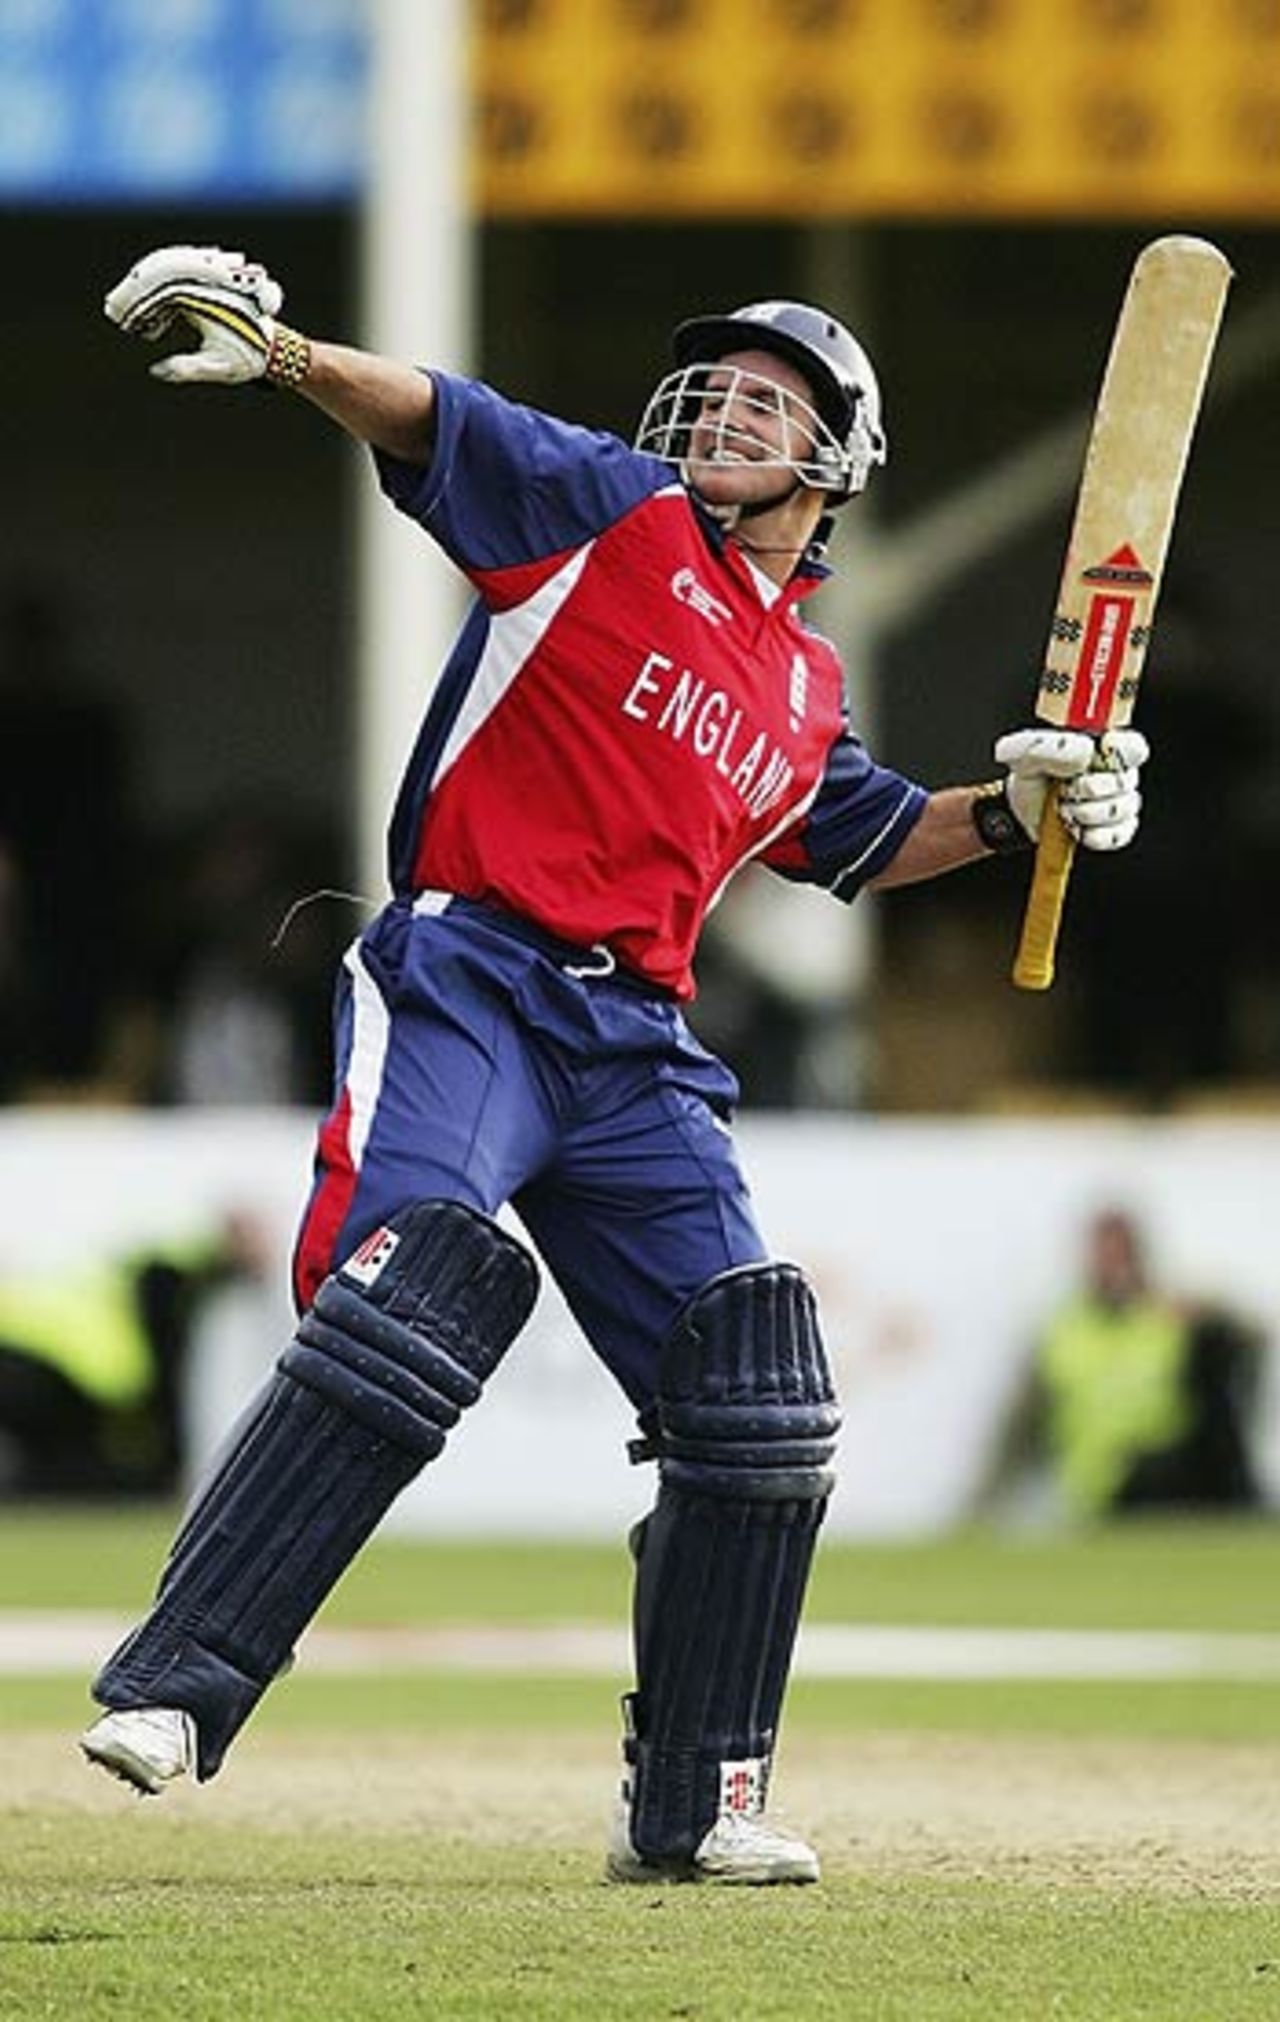 The moment of victory: Andrew Strauss celebrates as England overcome Australia in the semi-finals of the Champions Trophy, Edgbaston, September 21, 2004